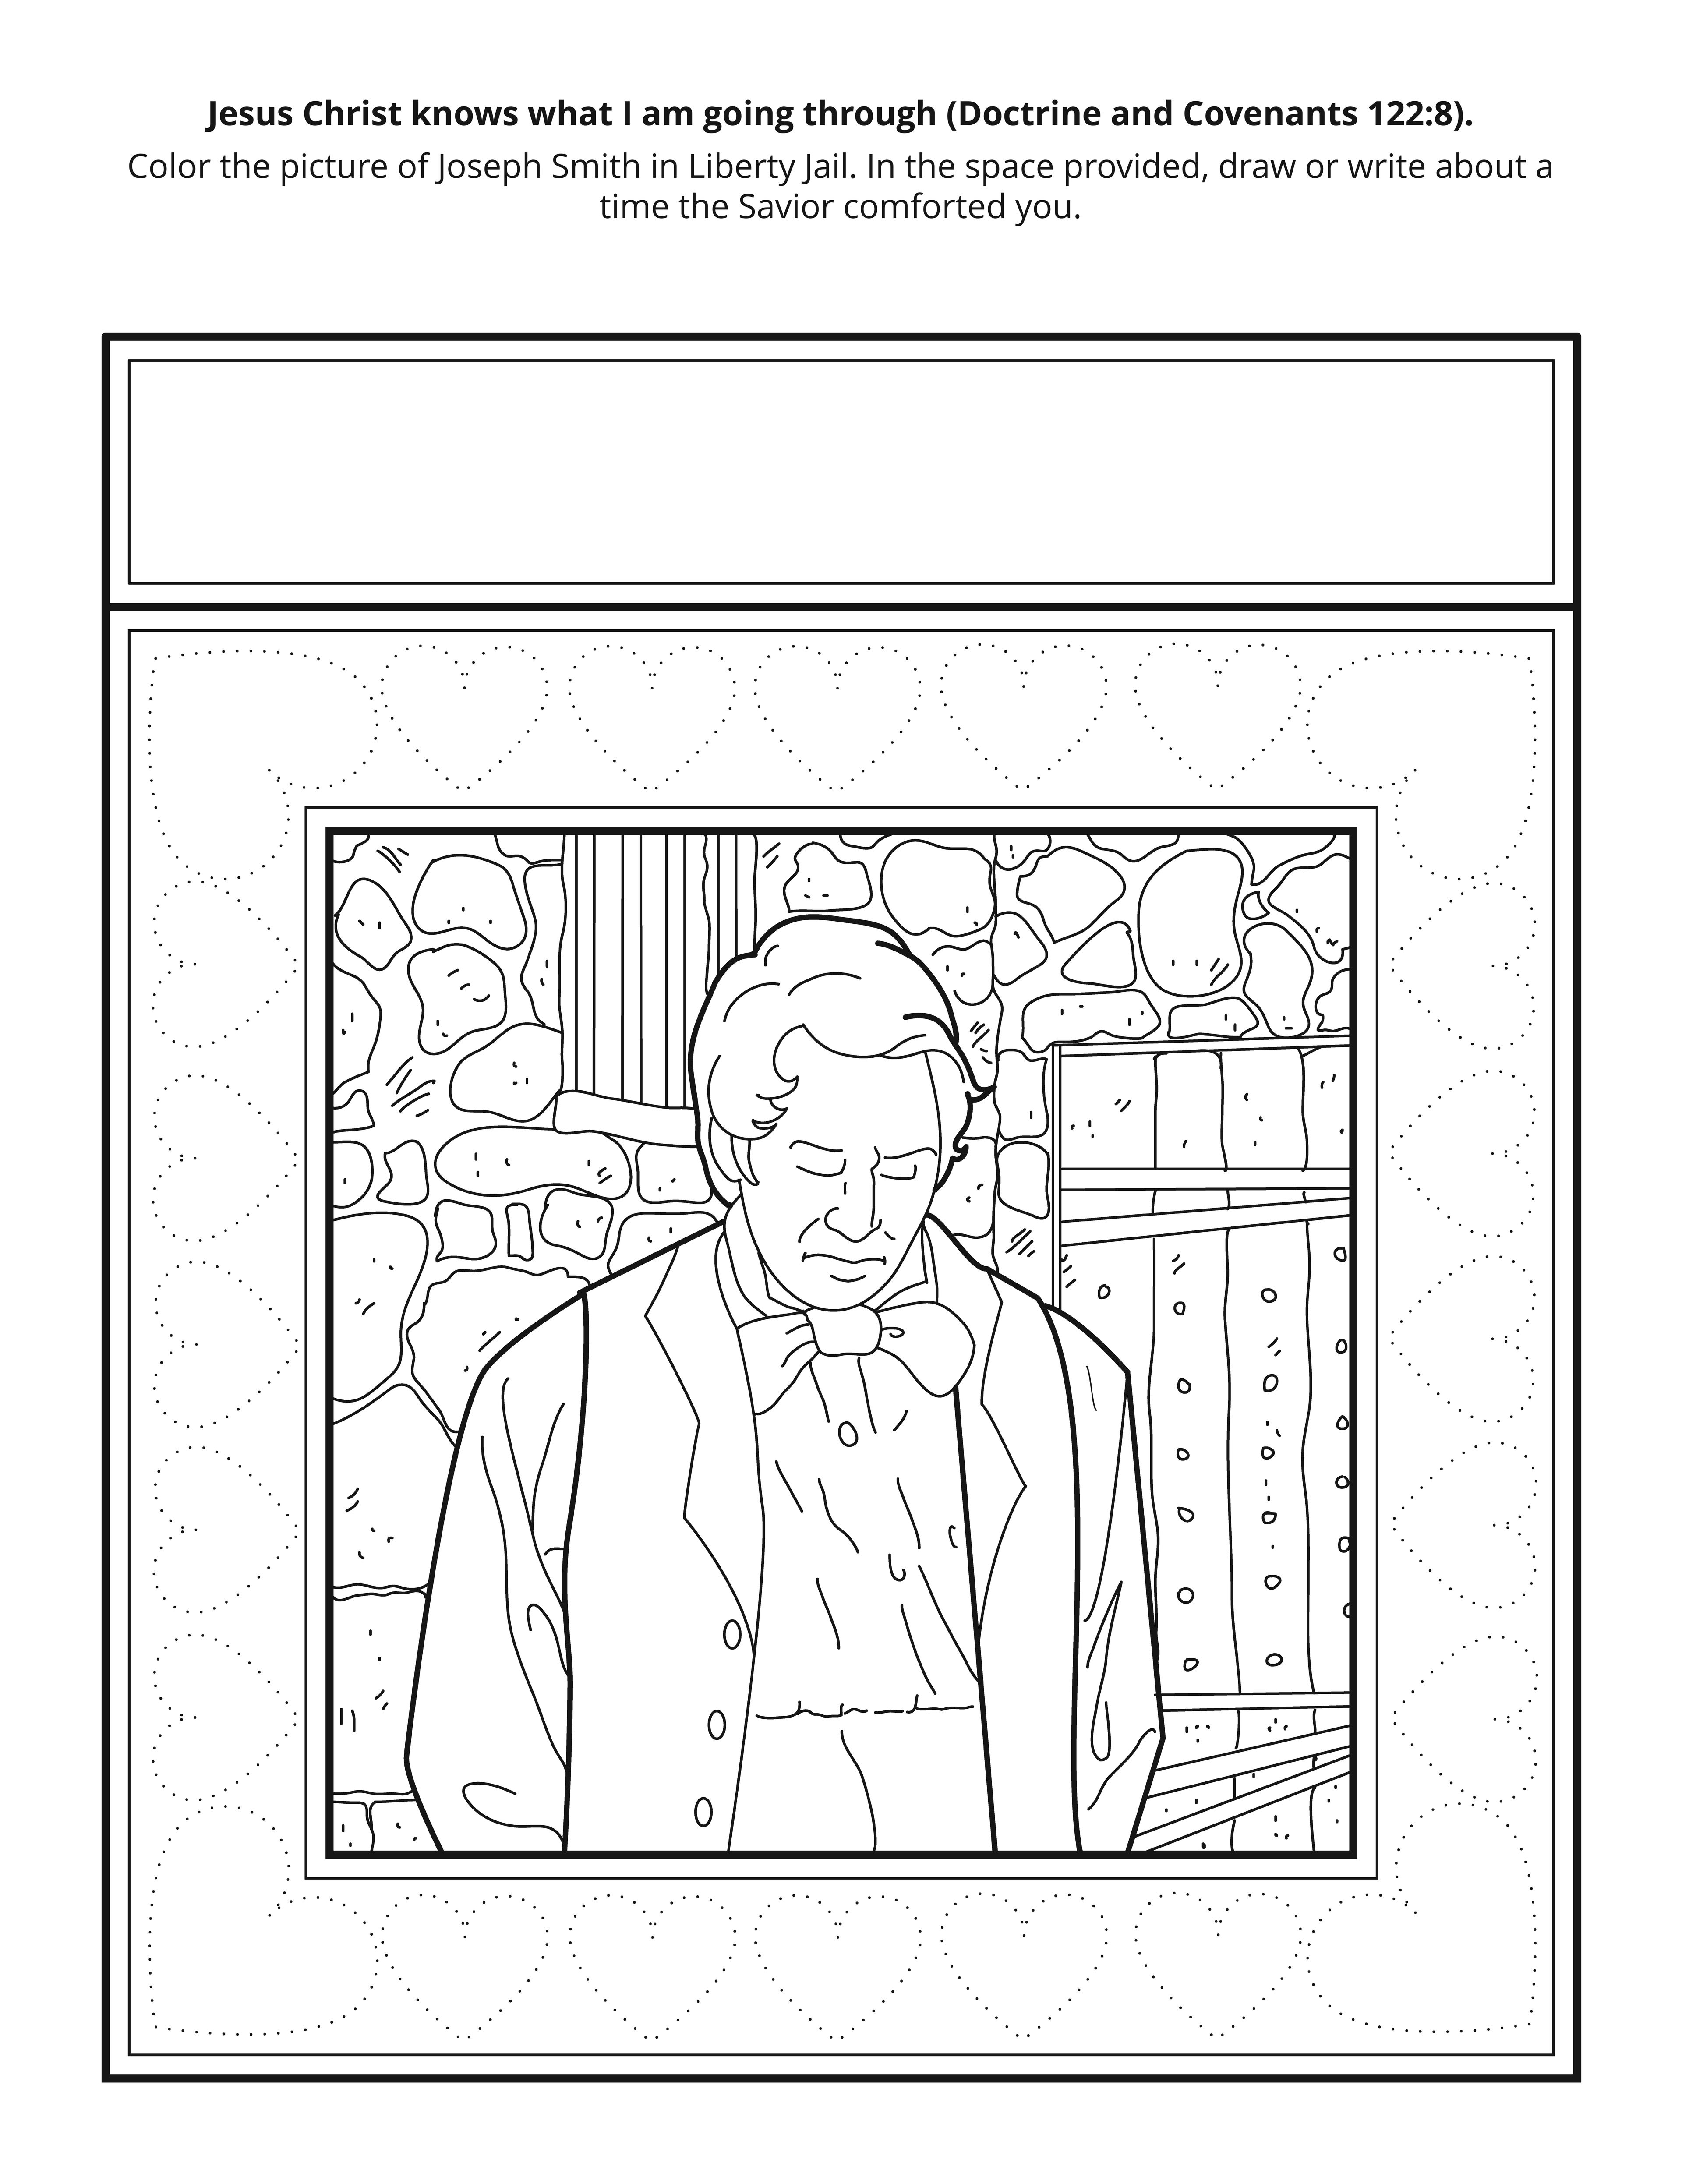 Coloring picture depicting Joseph Smith in Liberty Jail. © undefined ipCode 1.